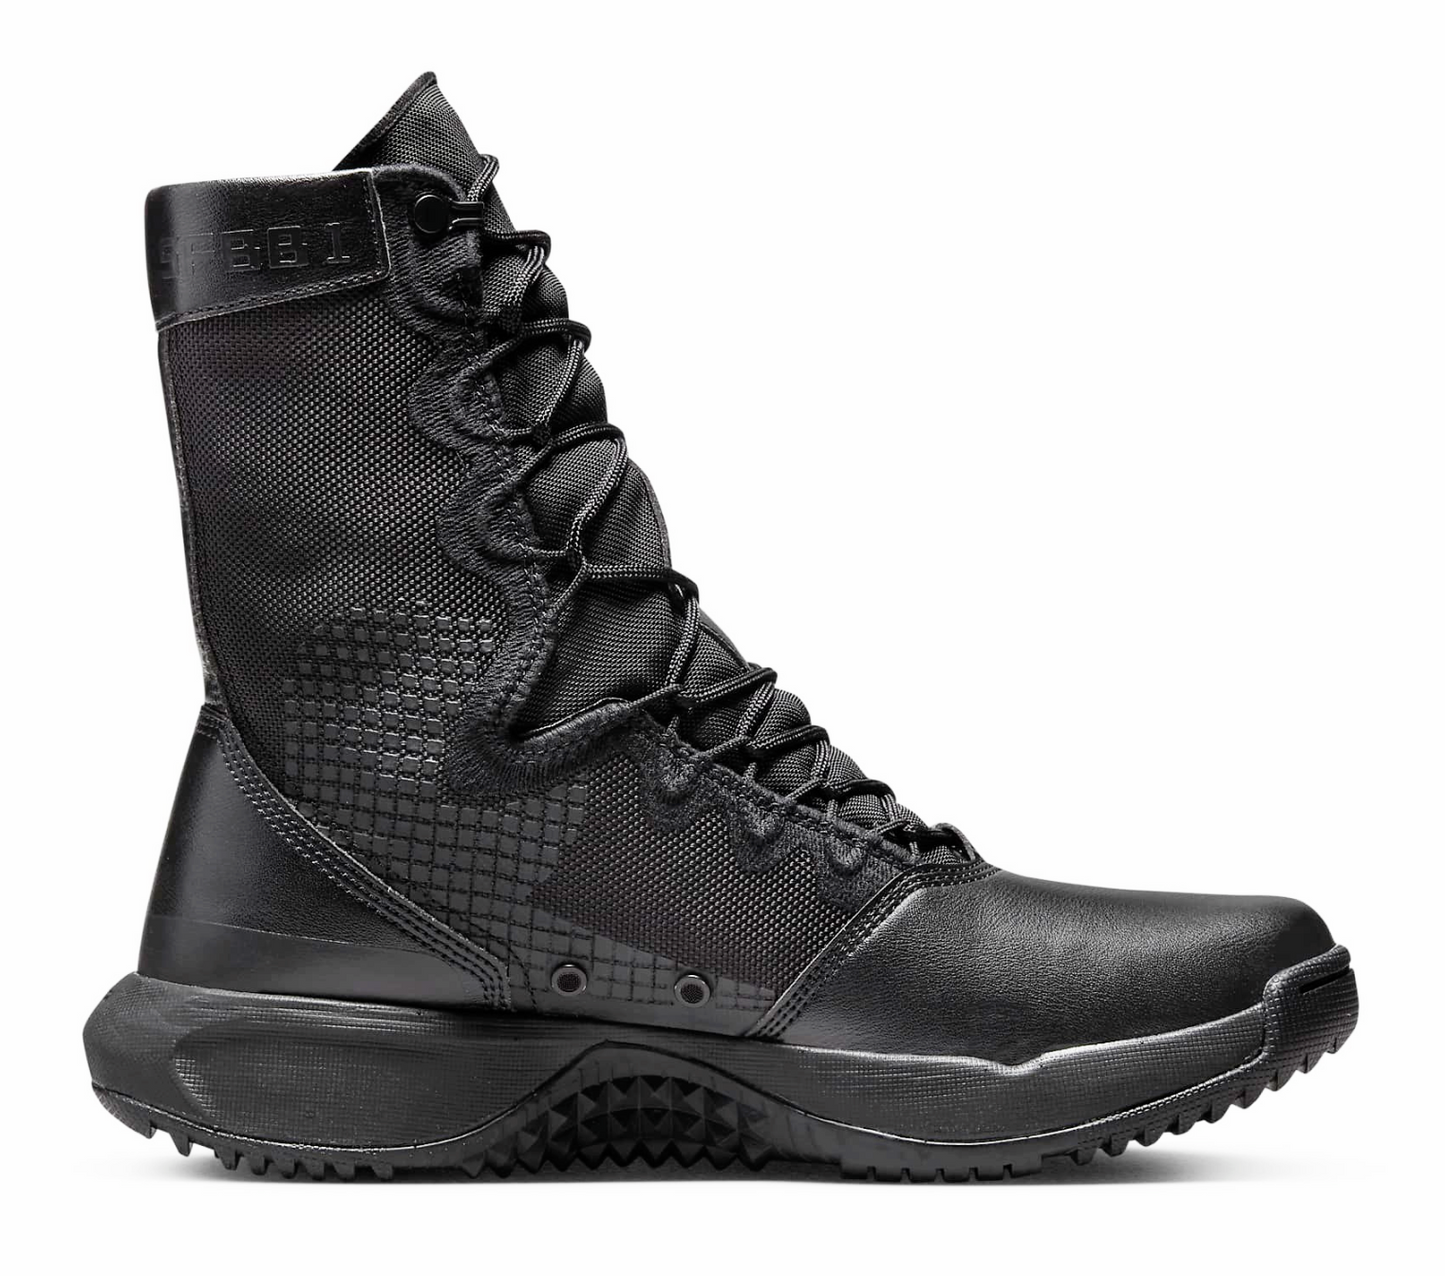 Nike SFB B1 Black Leather Tactical Boots